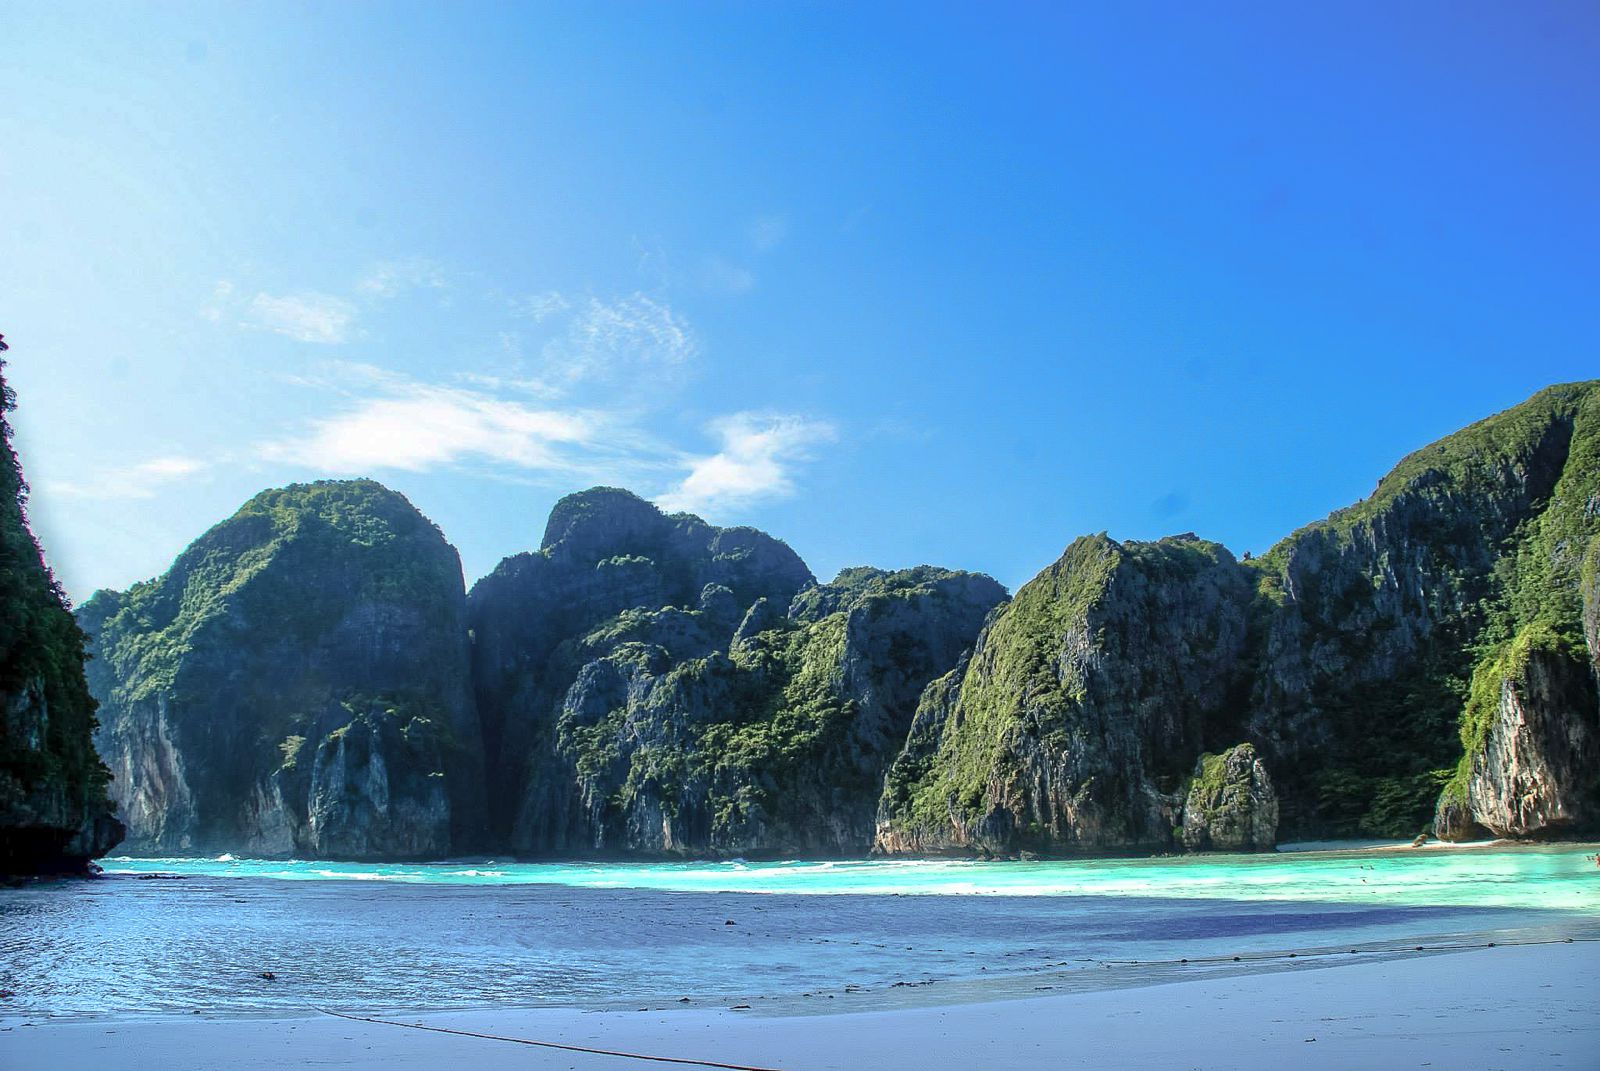 10 Things To Do When Visiting Maya Bay In The Phi Phi Islands, Thailand